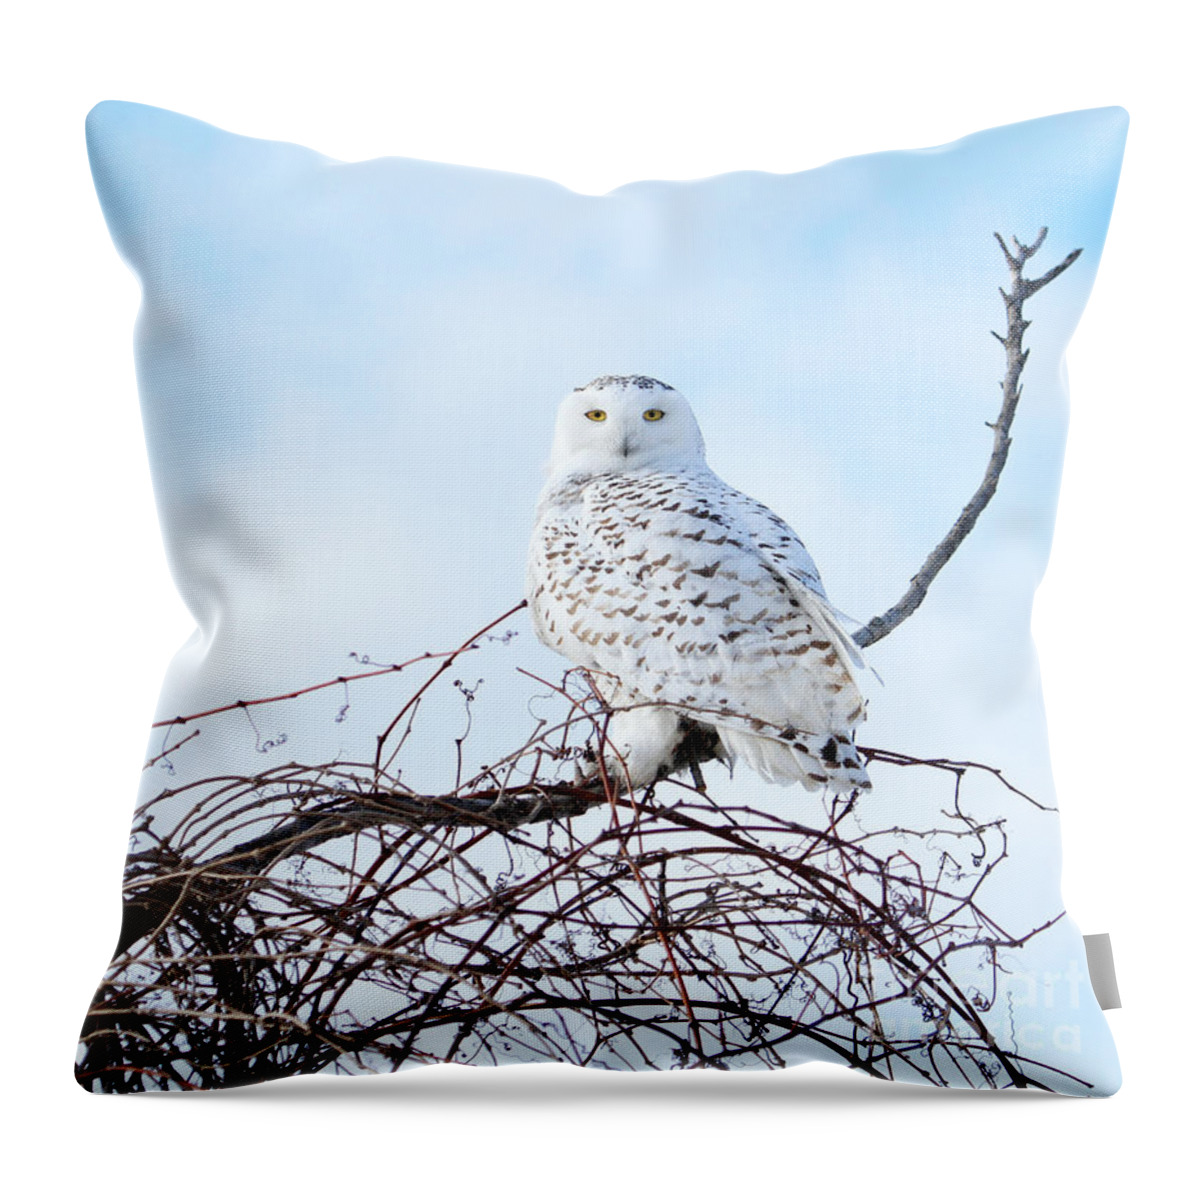 Snowy Owl Throw Pillow featuring the photograph Snow White by Heather King